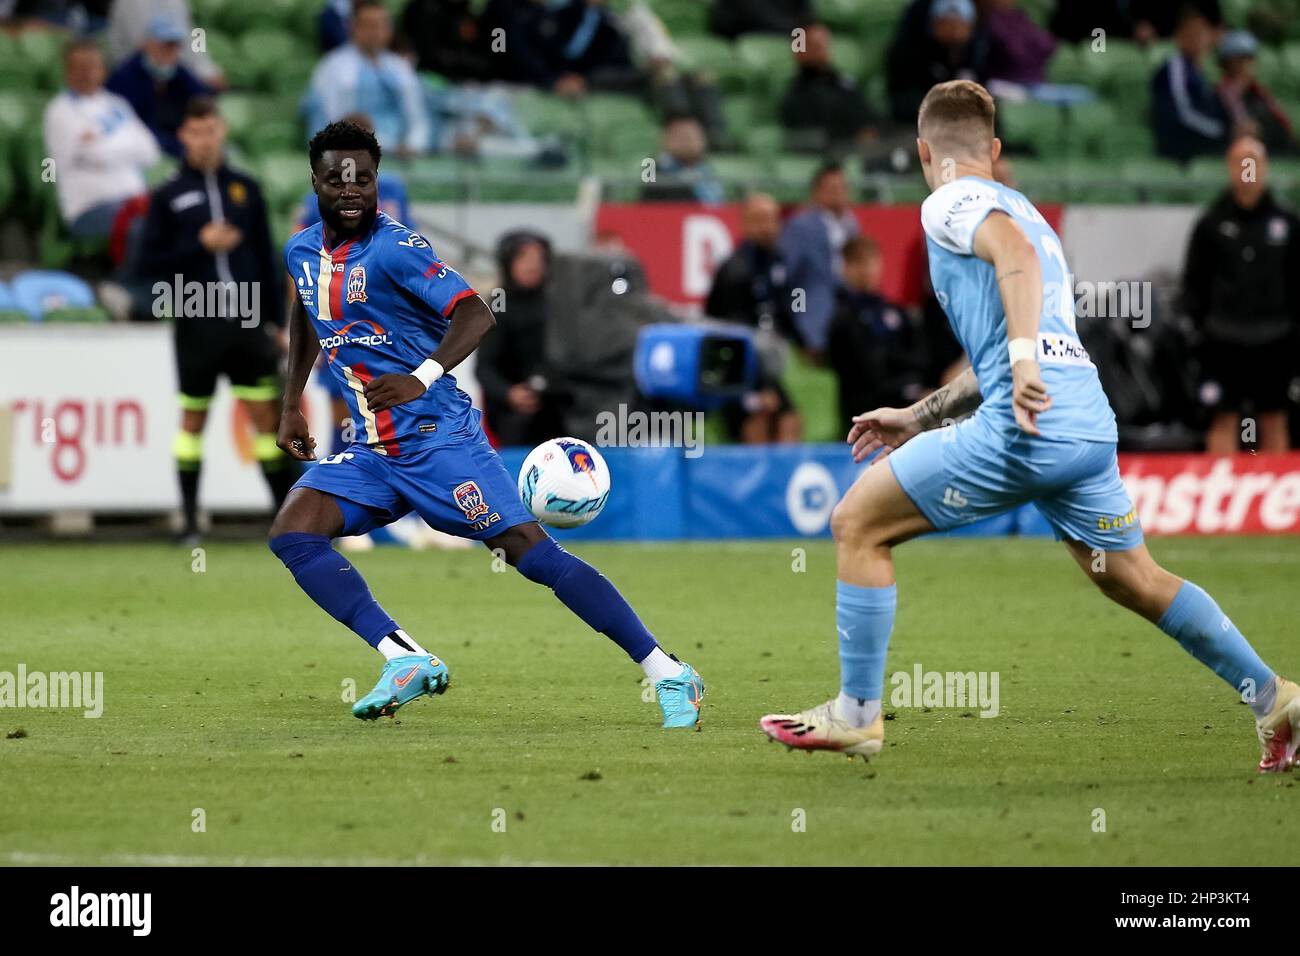 Melbourne, Australia, 18 February, 2022. Olivier Boumal of Newcastle Jets goes to block a ball during the A-League soccer match between Melbourne City FC and Newcastle Jets at AAMI Park on February 18, 2022 in Melbourne, Australia. Credit: Dave Hewison/Speed Media/Alamy Live News Stock Photo